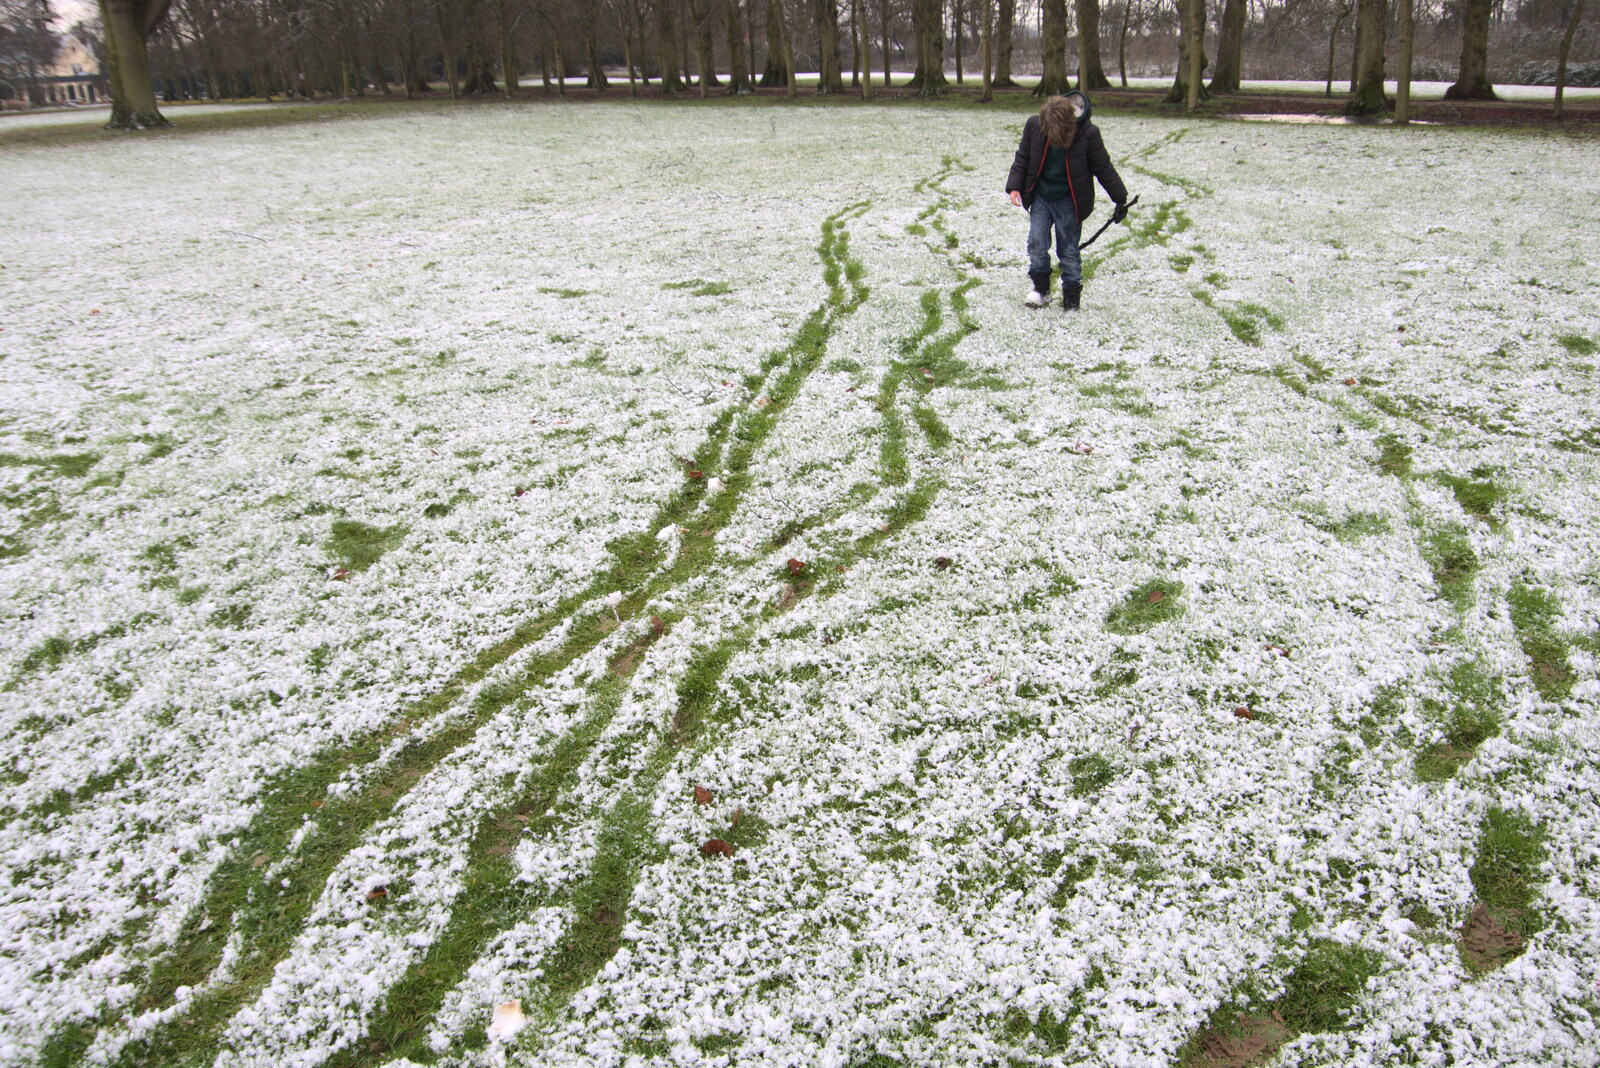 Trails of footsteps from Winter Lockdown Walks, Thrandeston and Brome, Suffolk - 24th January 2021